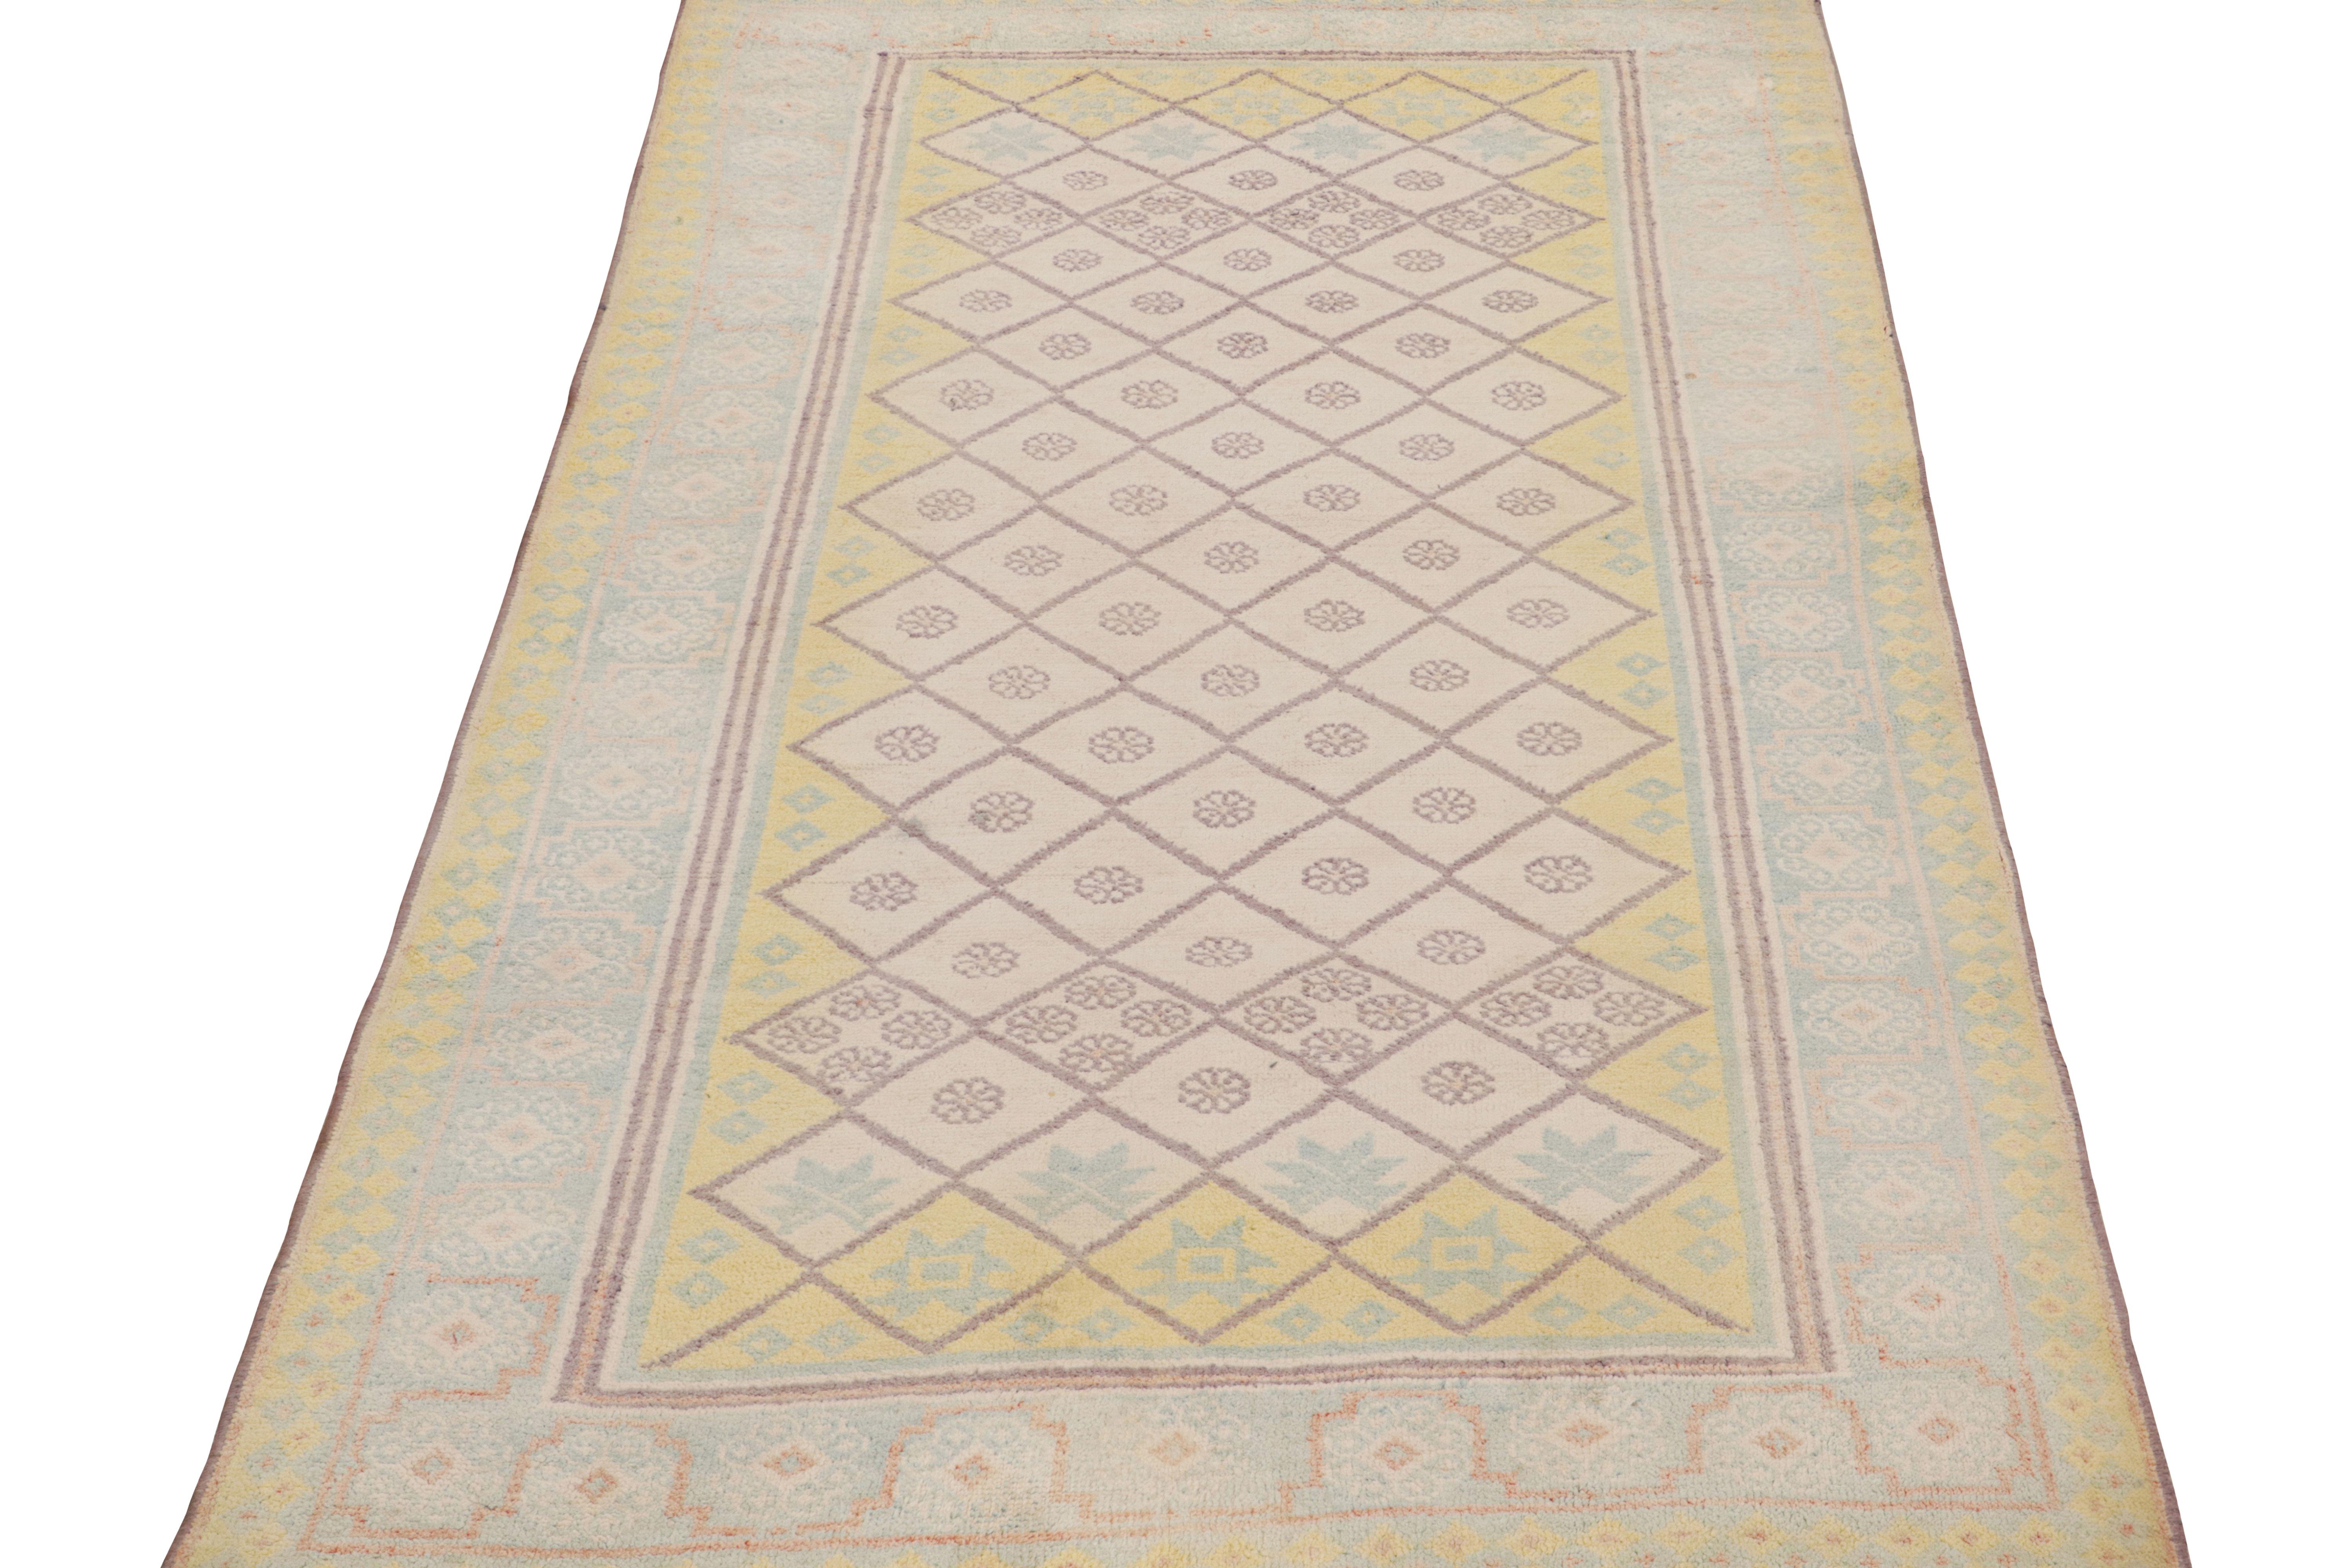 Indian Antique Agra Rug in Cream Tones with Lattice & Floral Patterns, from Rug & Kilim For Sale